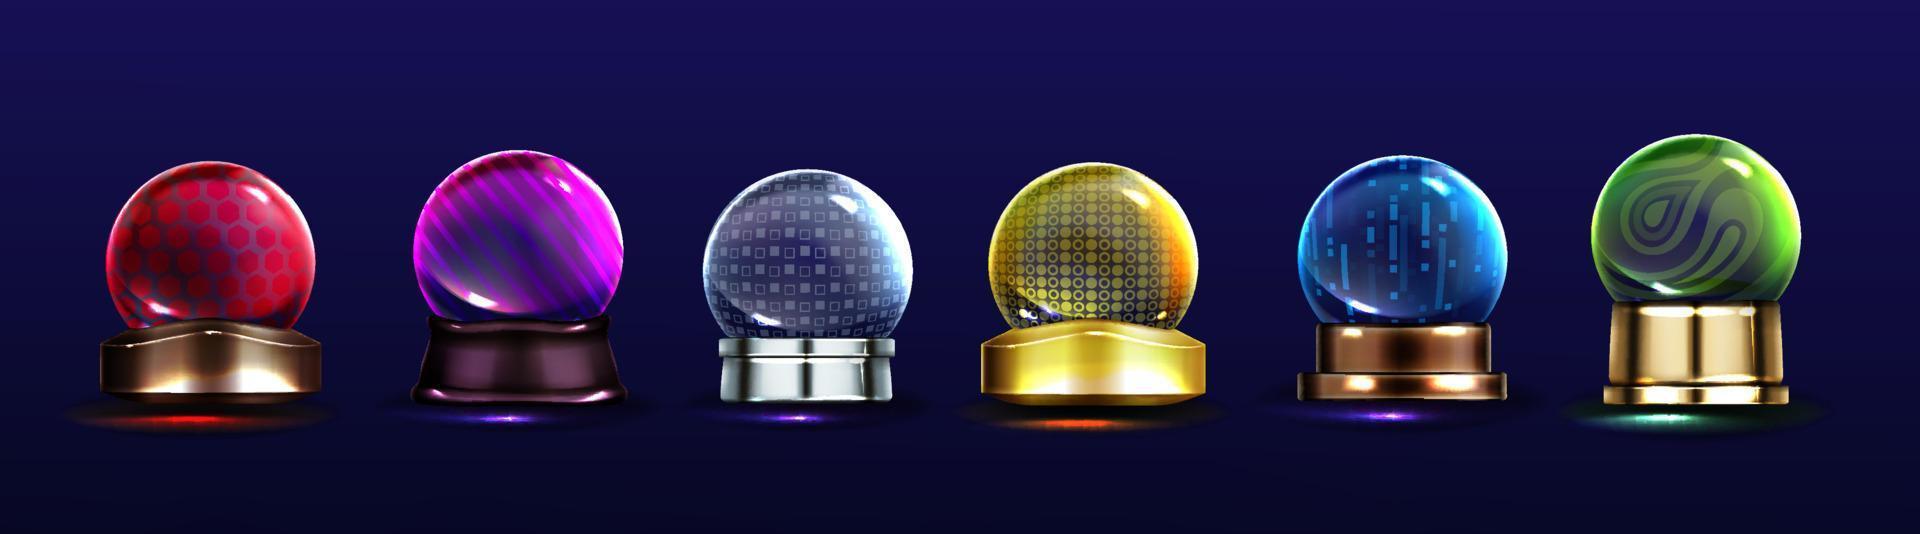 Crystal globes, snow balls on metal stands vector